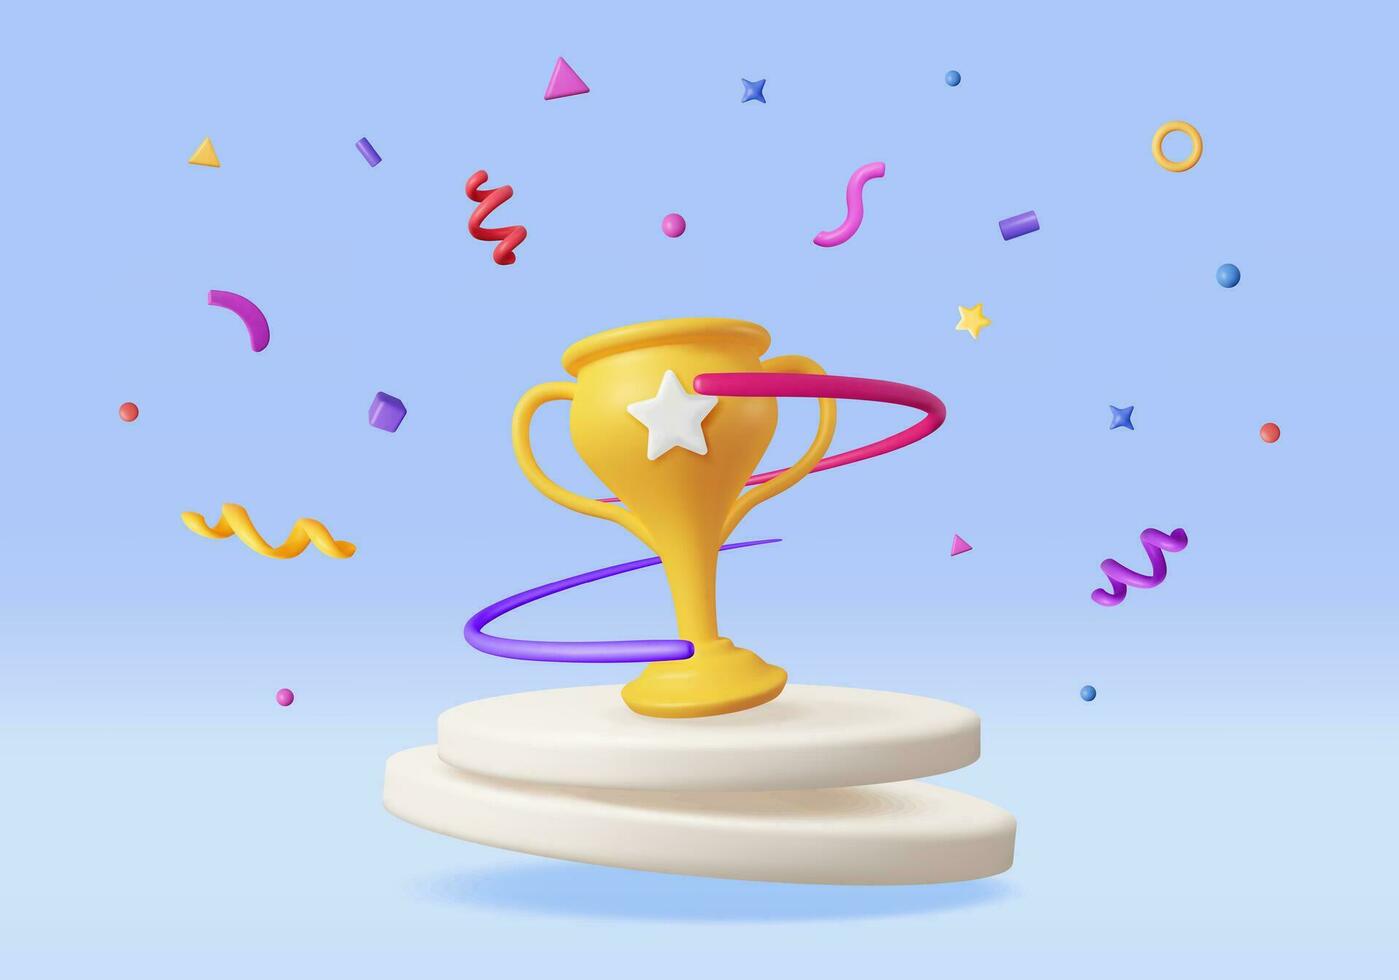 3D Golden Champion Trophy with Confetti on Podium. Render Gold Cup Trophy Icon. Gold Trophy for Competitions. Award Victory, Goal Champion Achievement, Prize Sports Award, Success. Vector Illustration